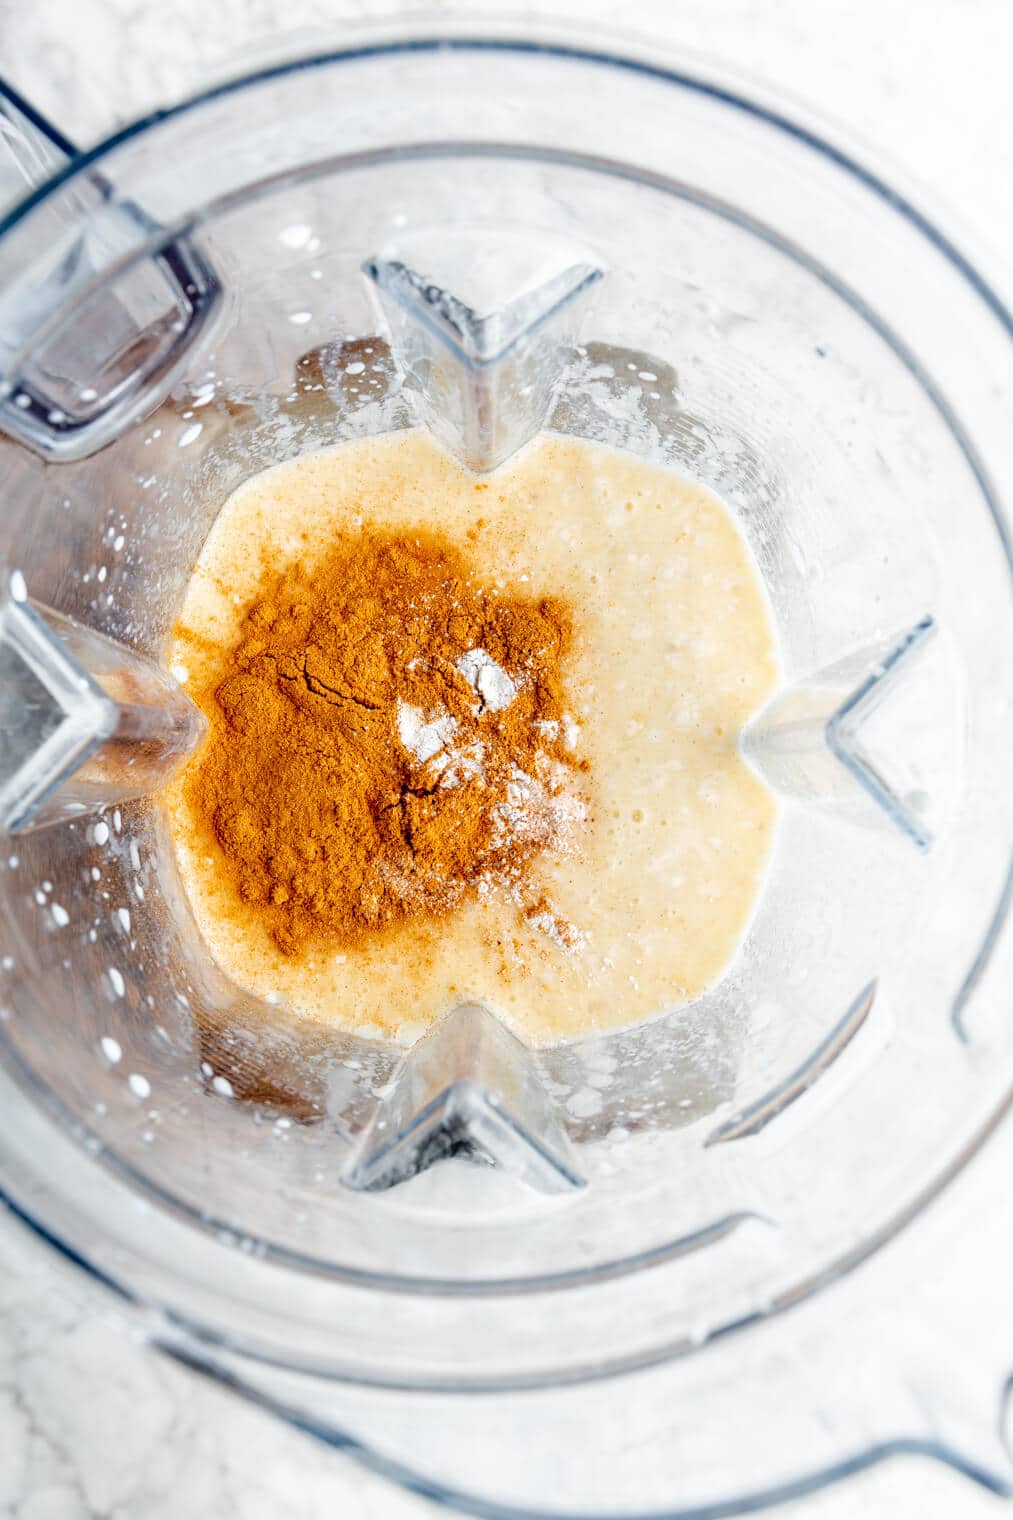 Spices and egg added to a blender pitcher that contains blended banana and milk.